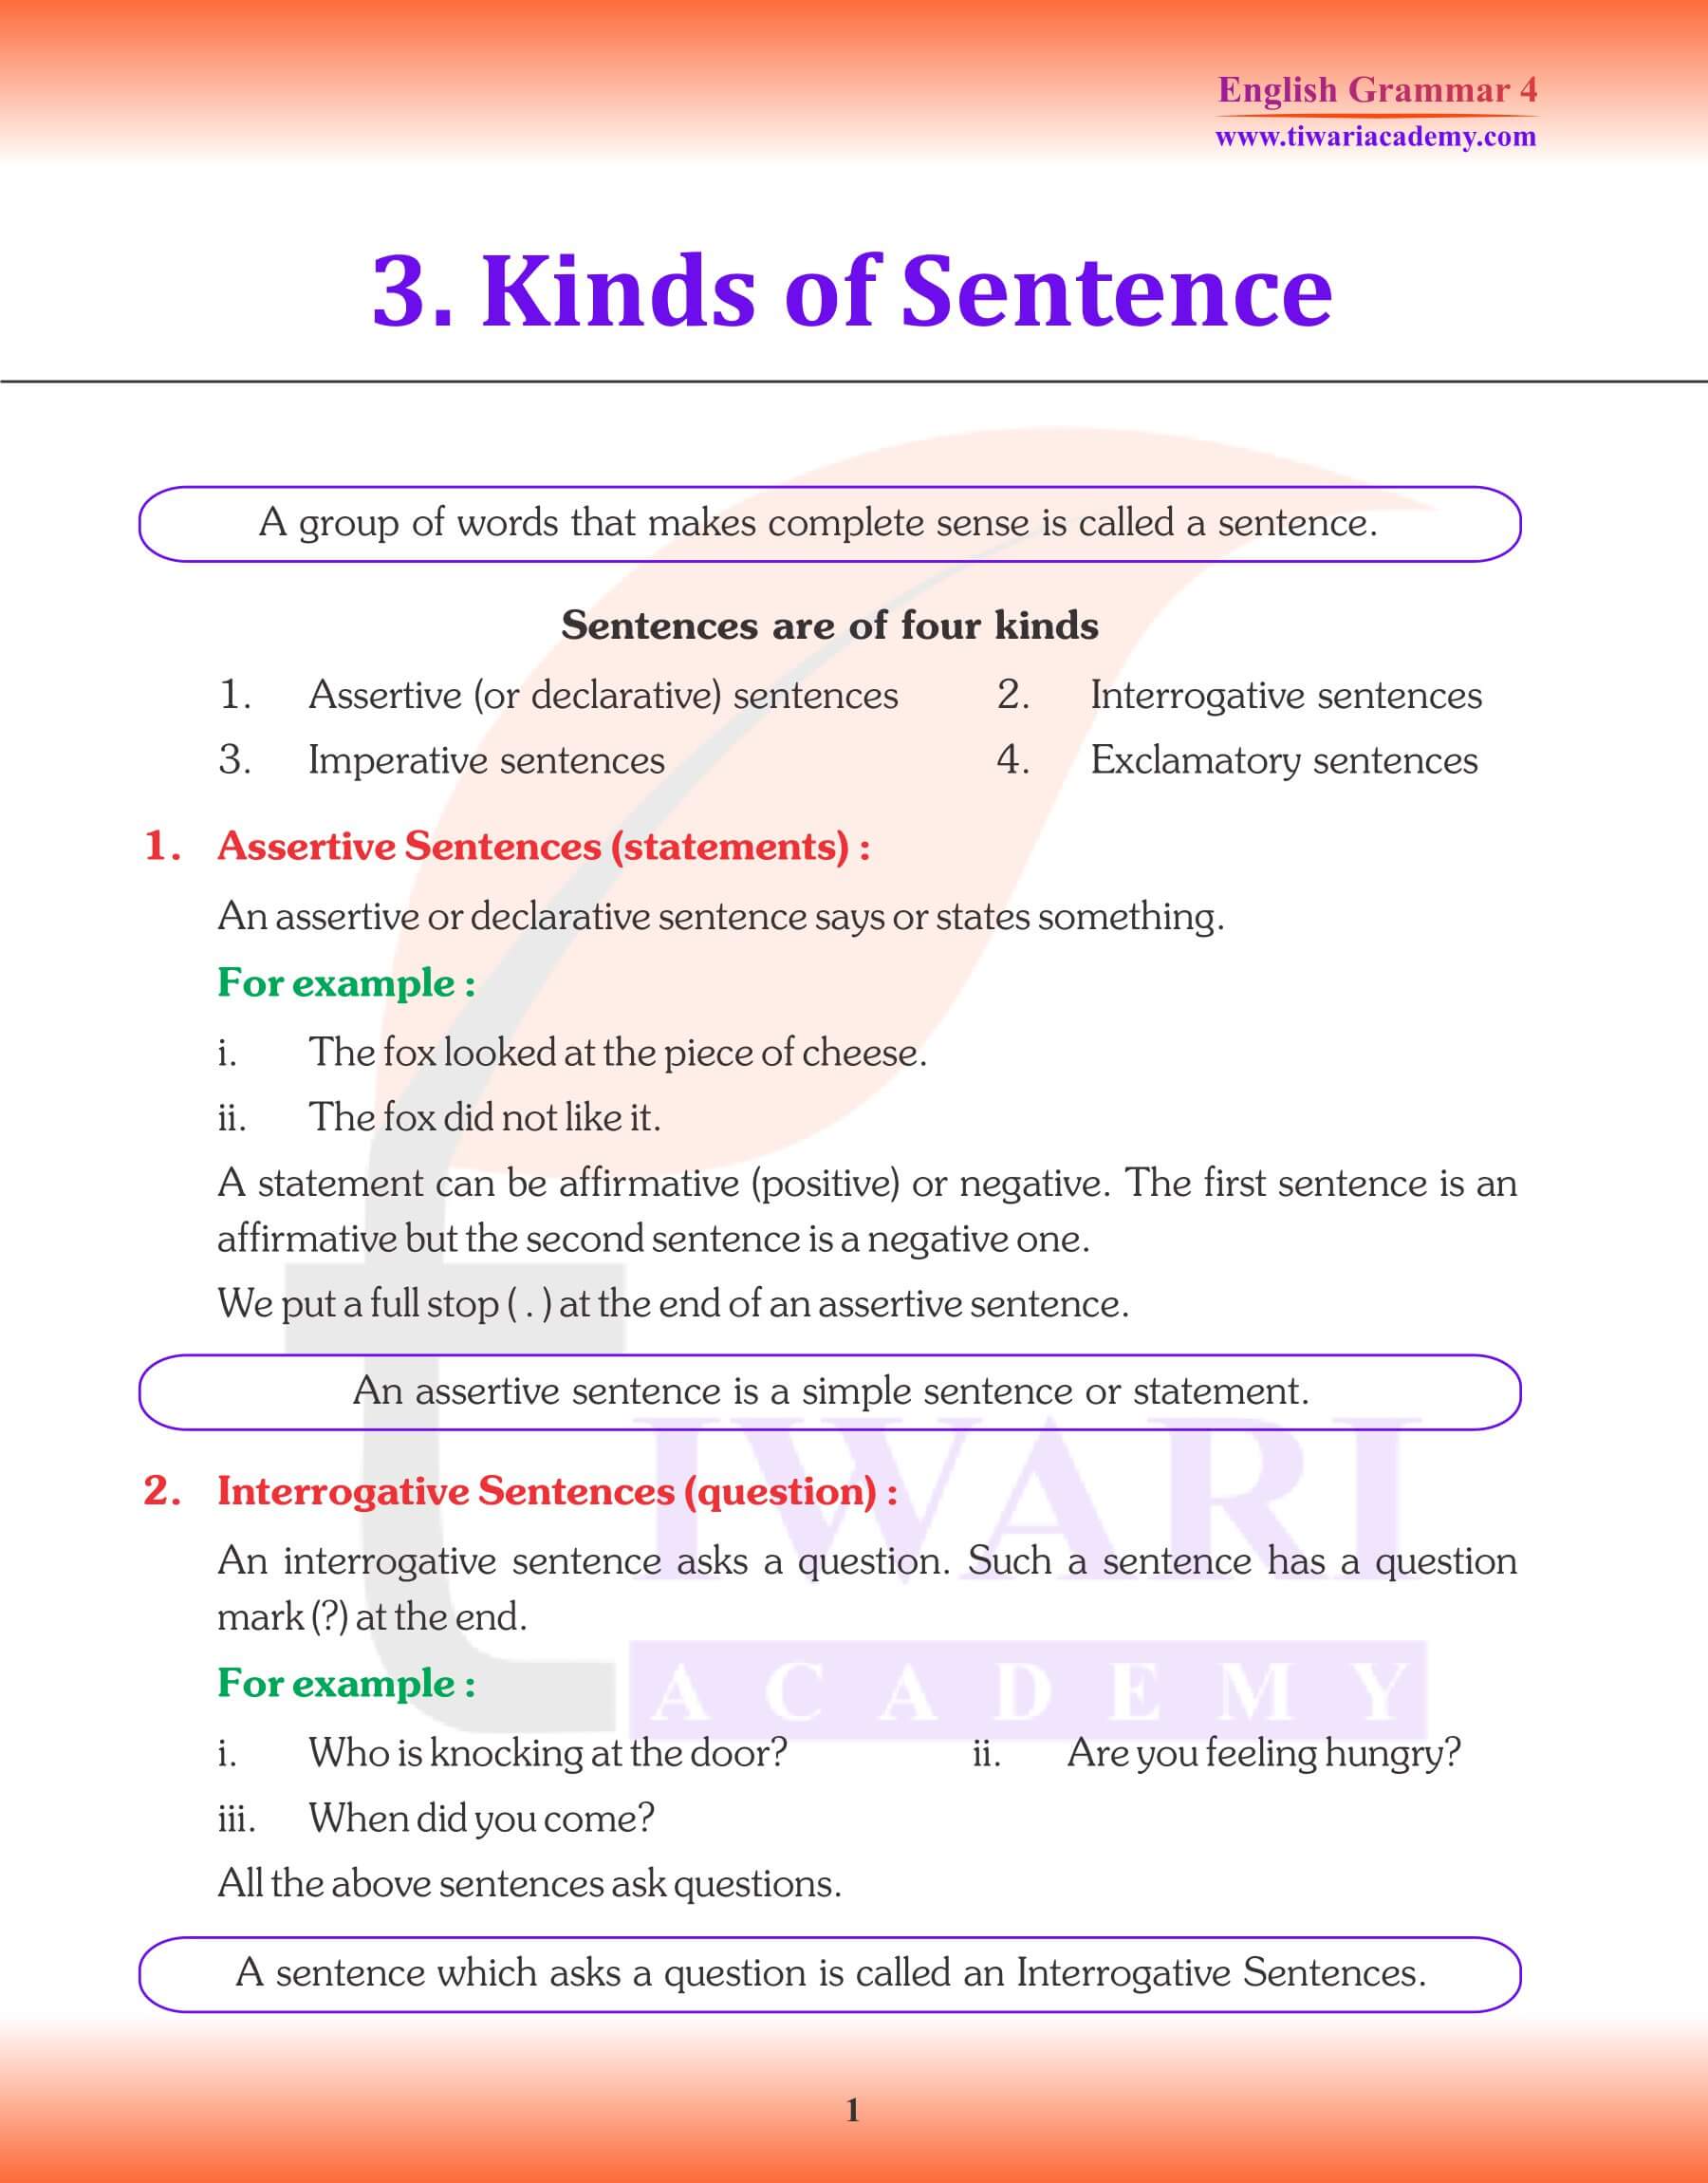 4th English Grammar Chapter 3 Kinds of Sentence